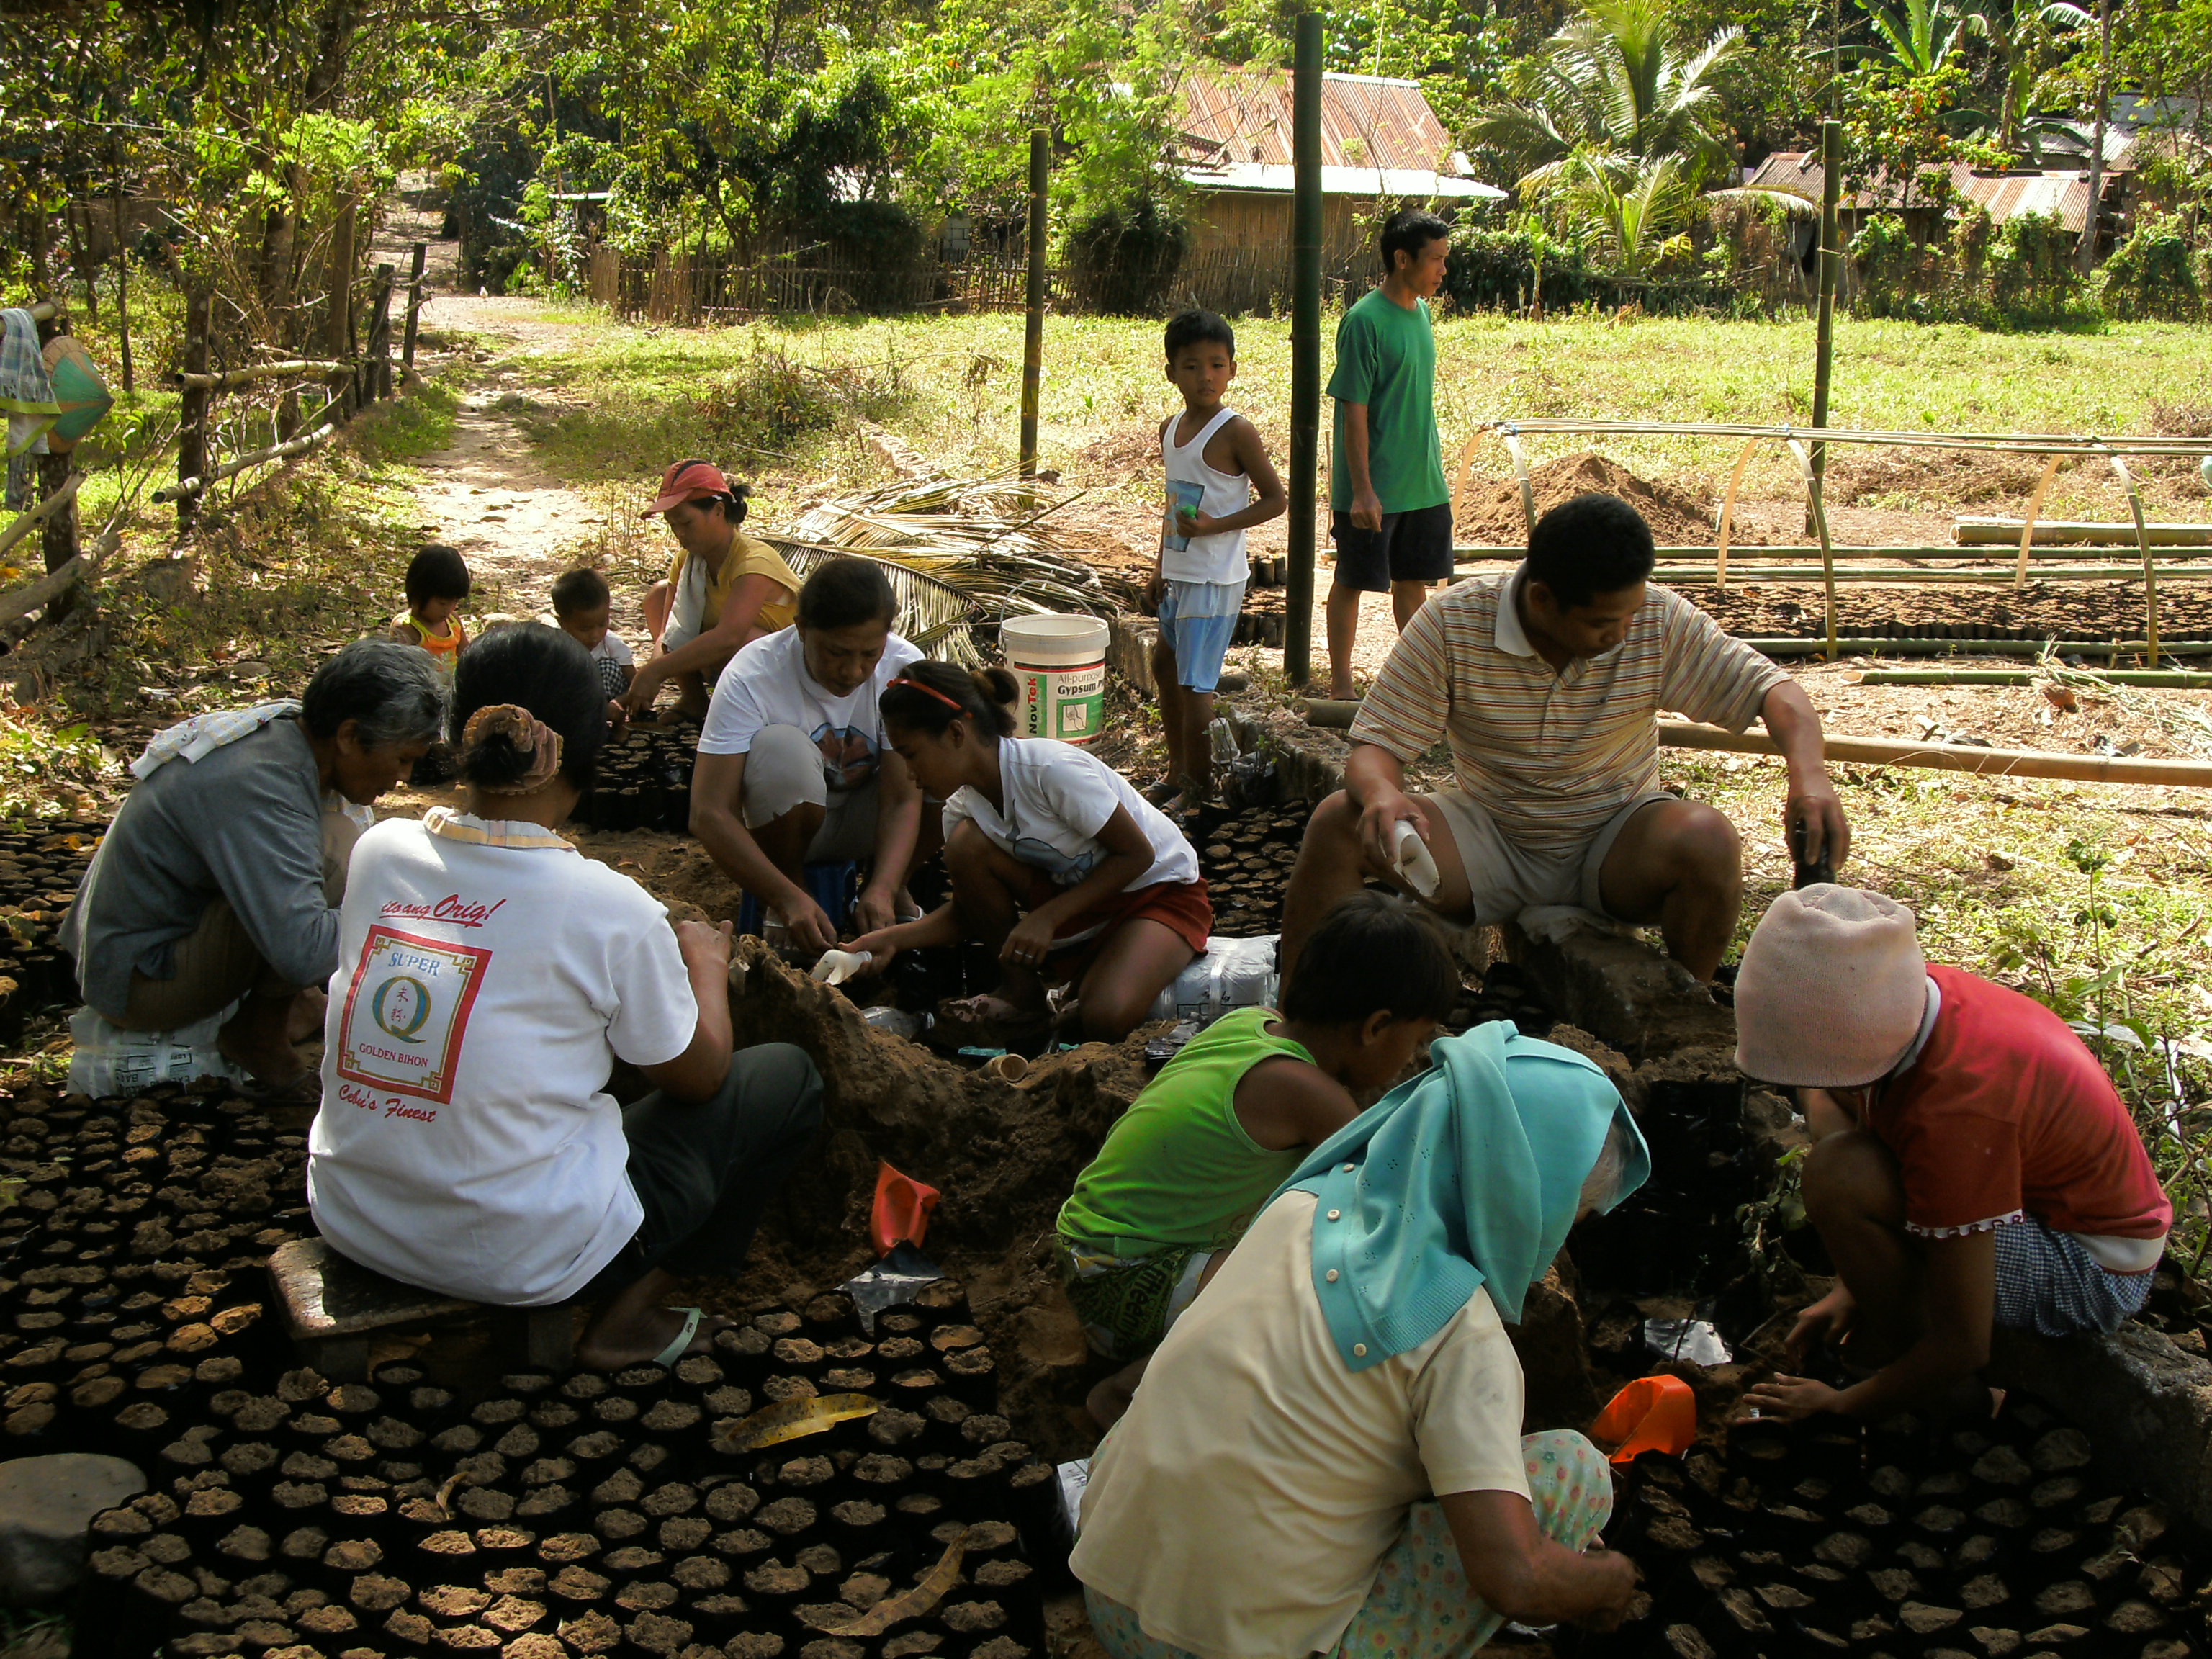 A community nursery establishment in Tayabasan, one of the areas covered by the greater Upper Marikina Watershed. (FPE photo)